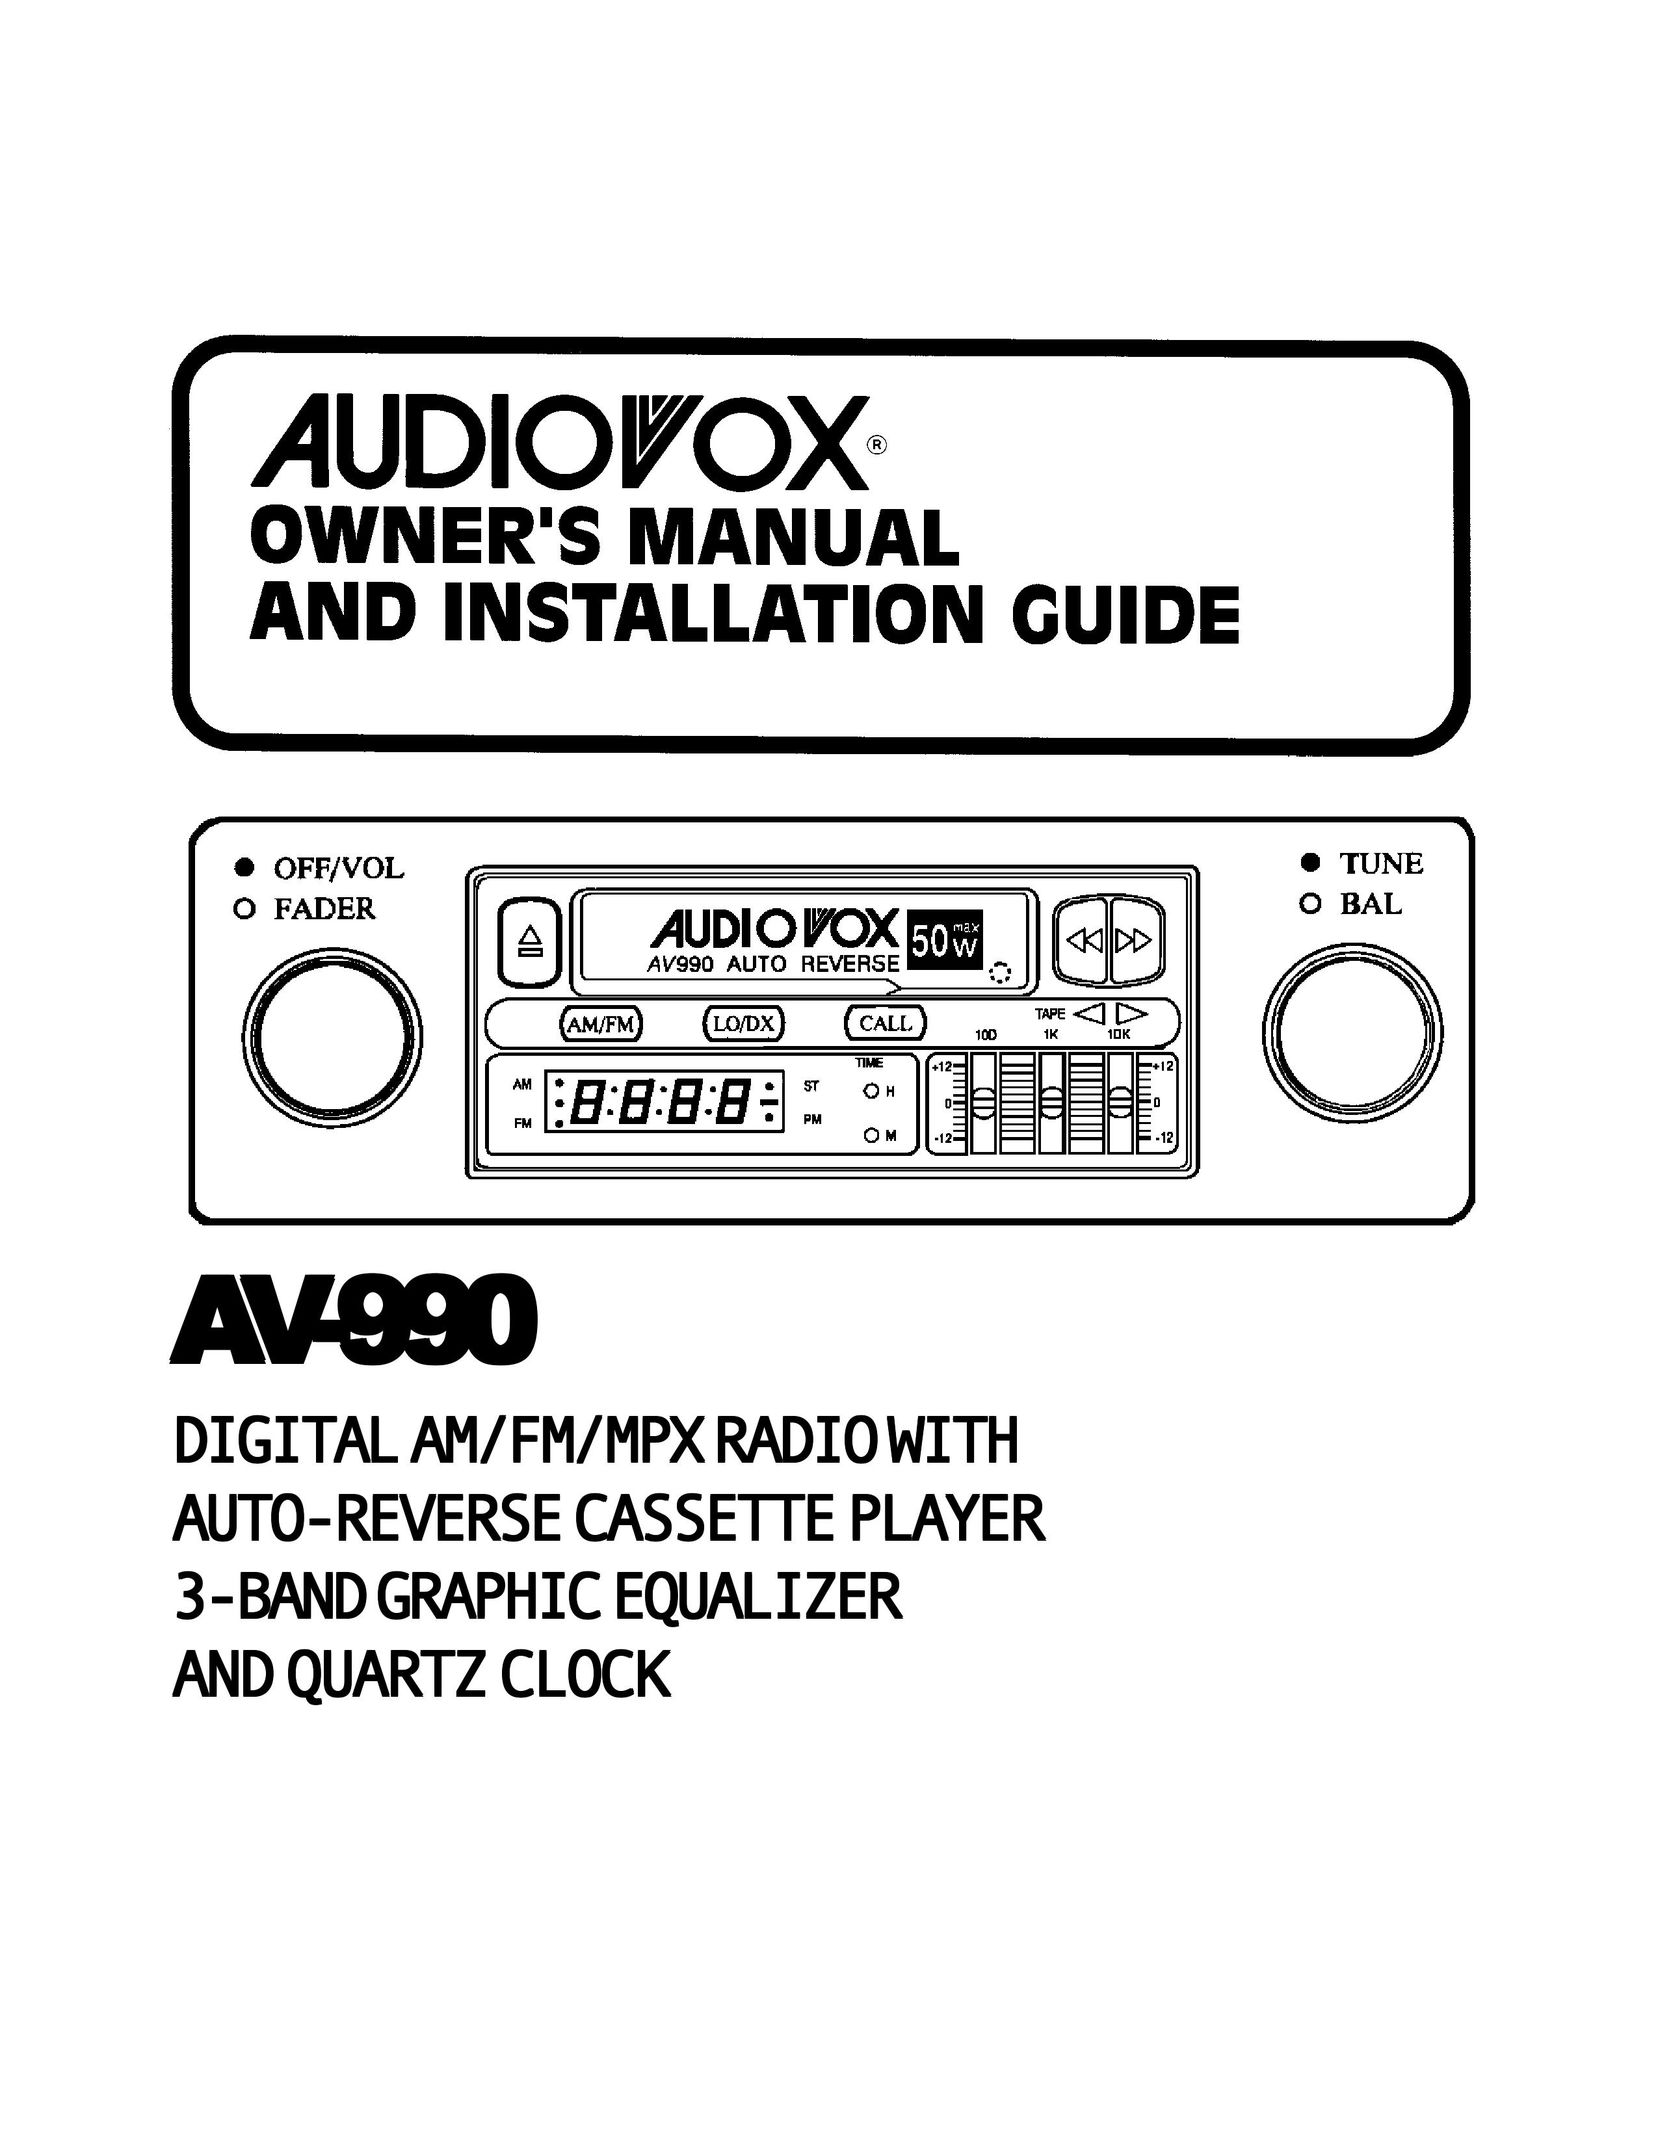 Audiovox 990 Cassette Player User Manual (Page 1)